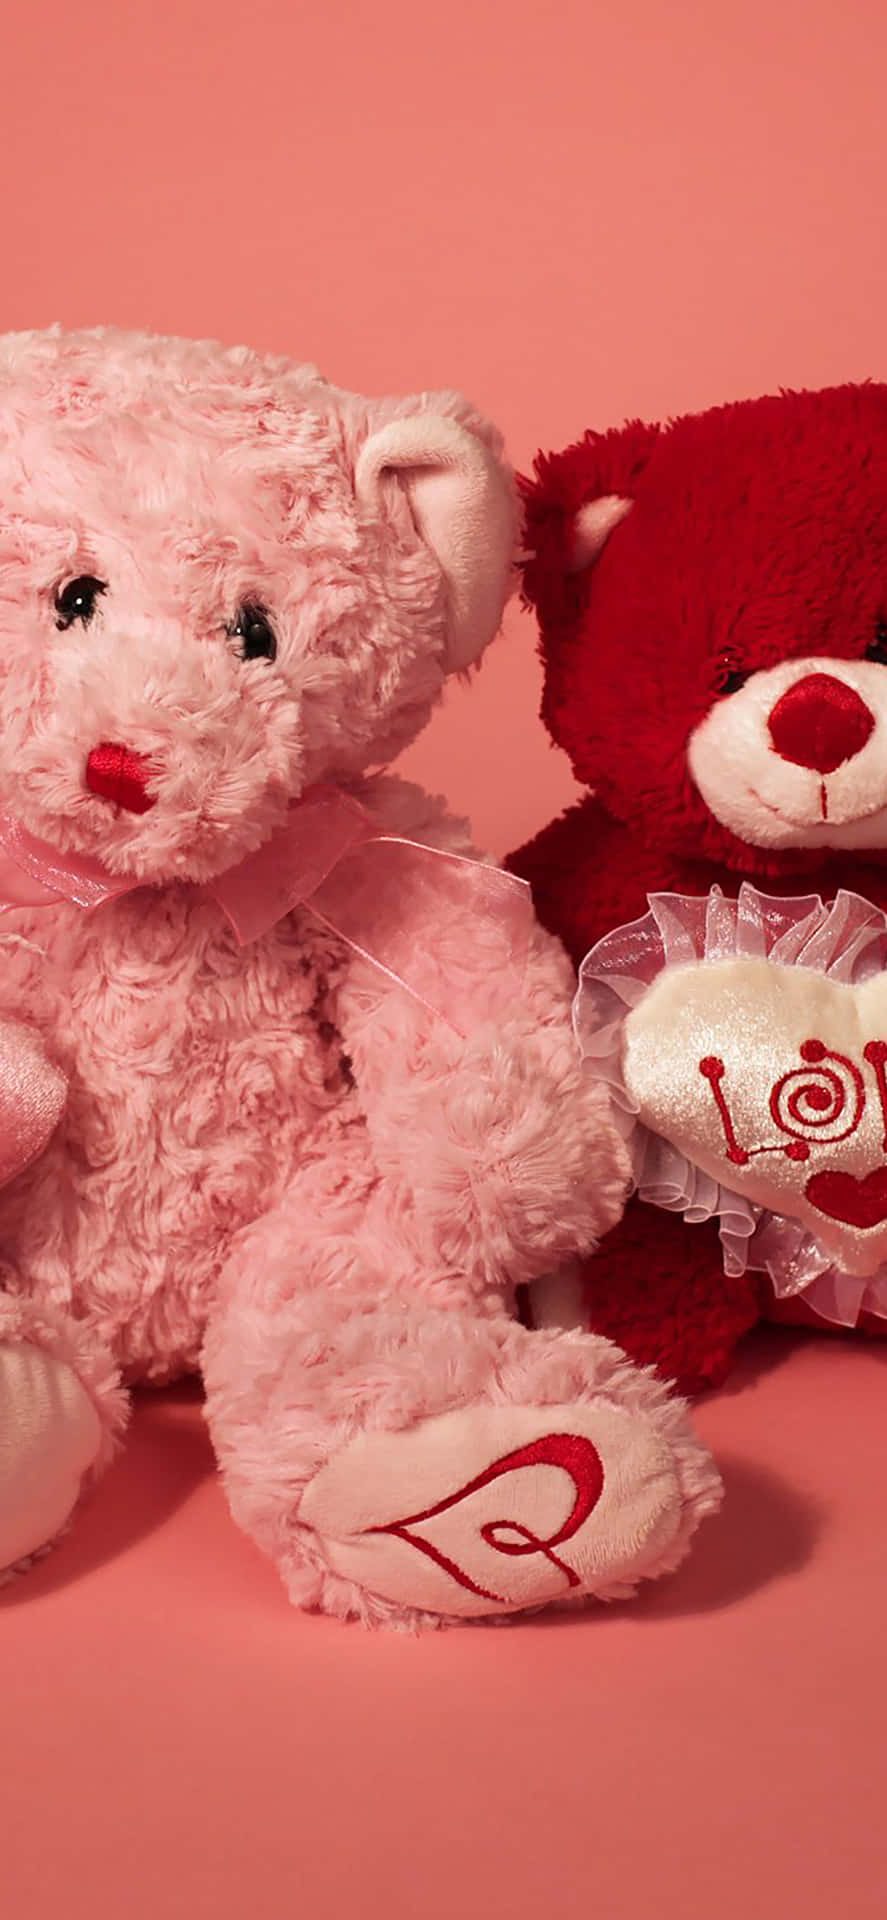 Photograph Of Teddy Bear Aesthetic Valentine's Day Wallpaper